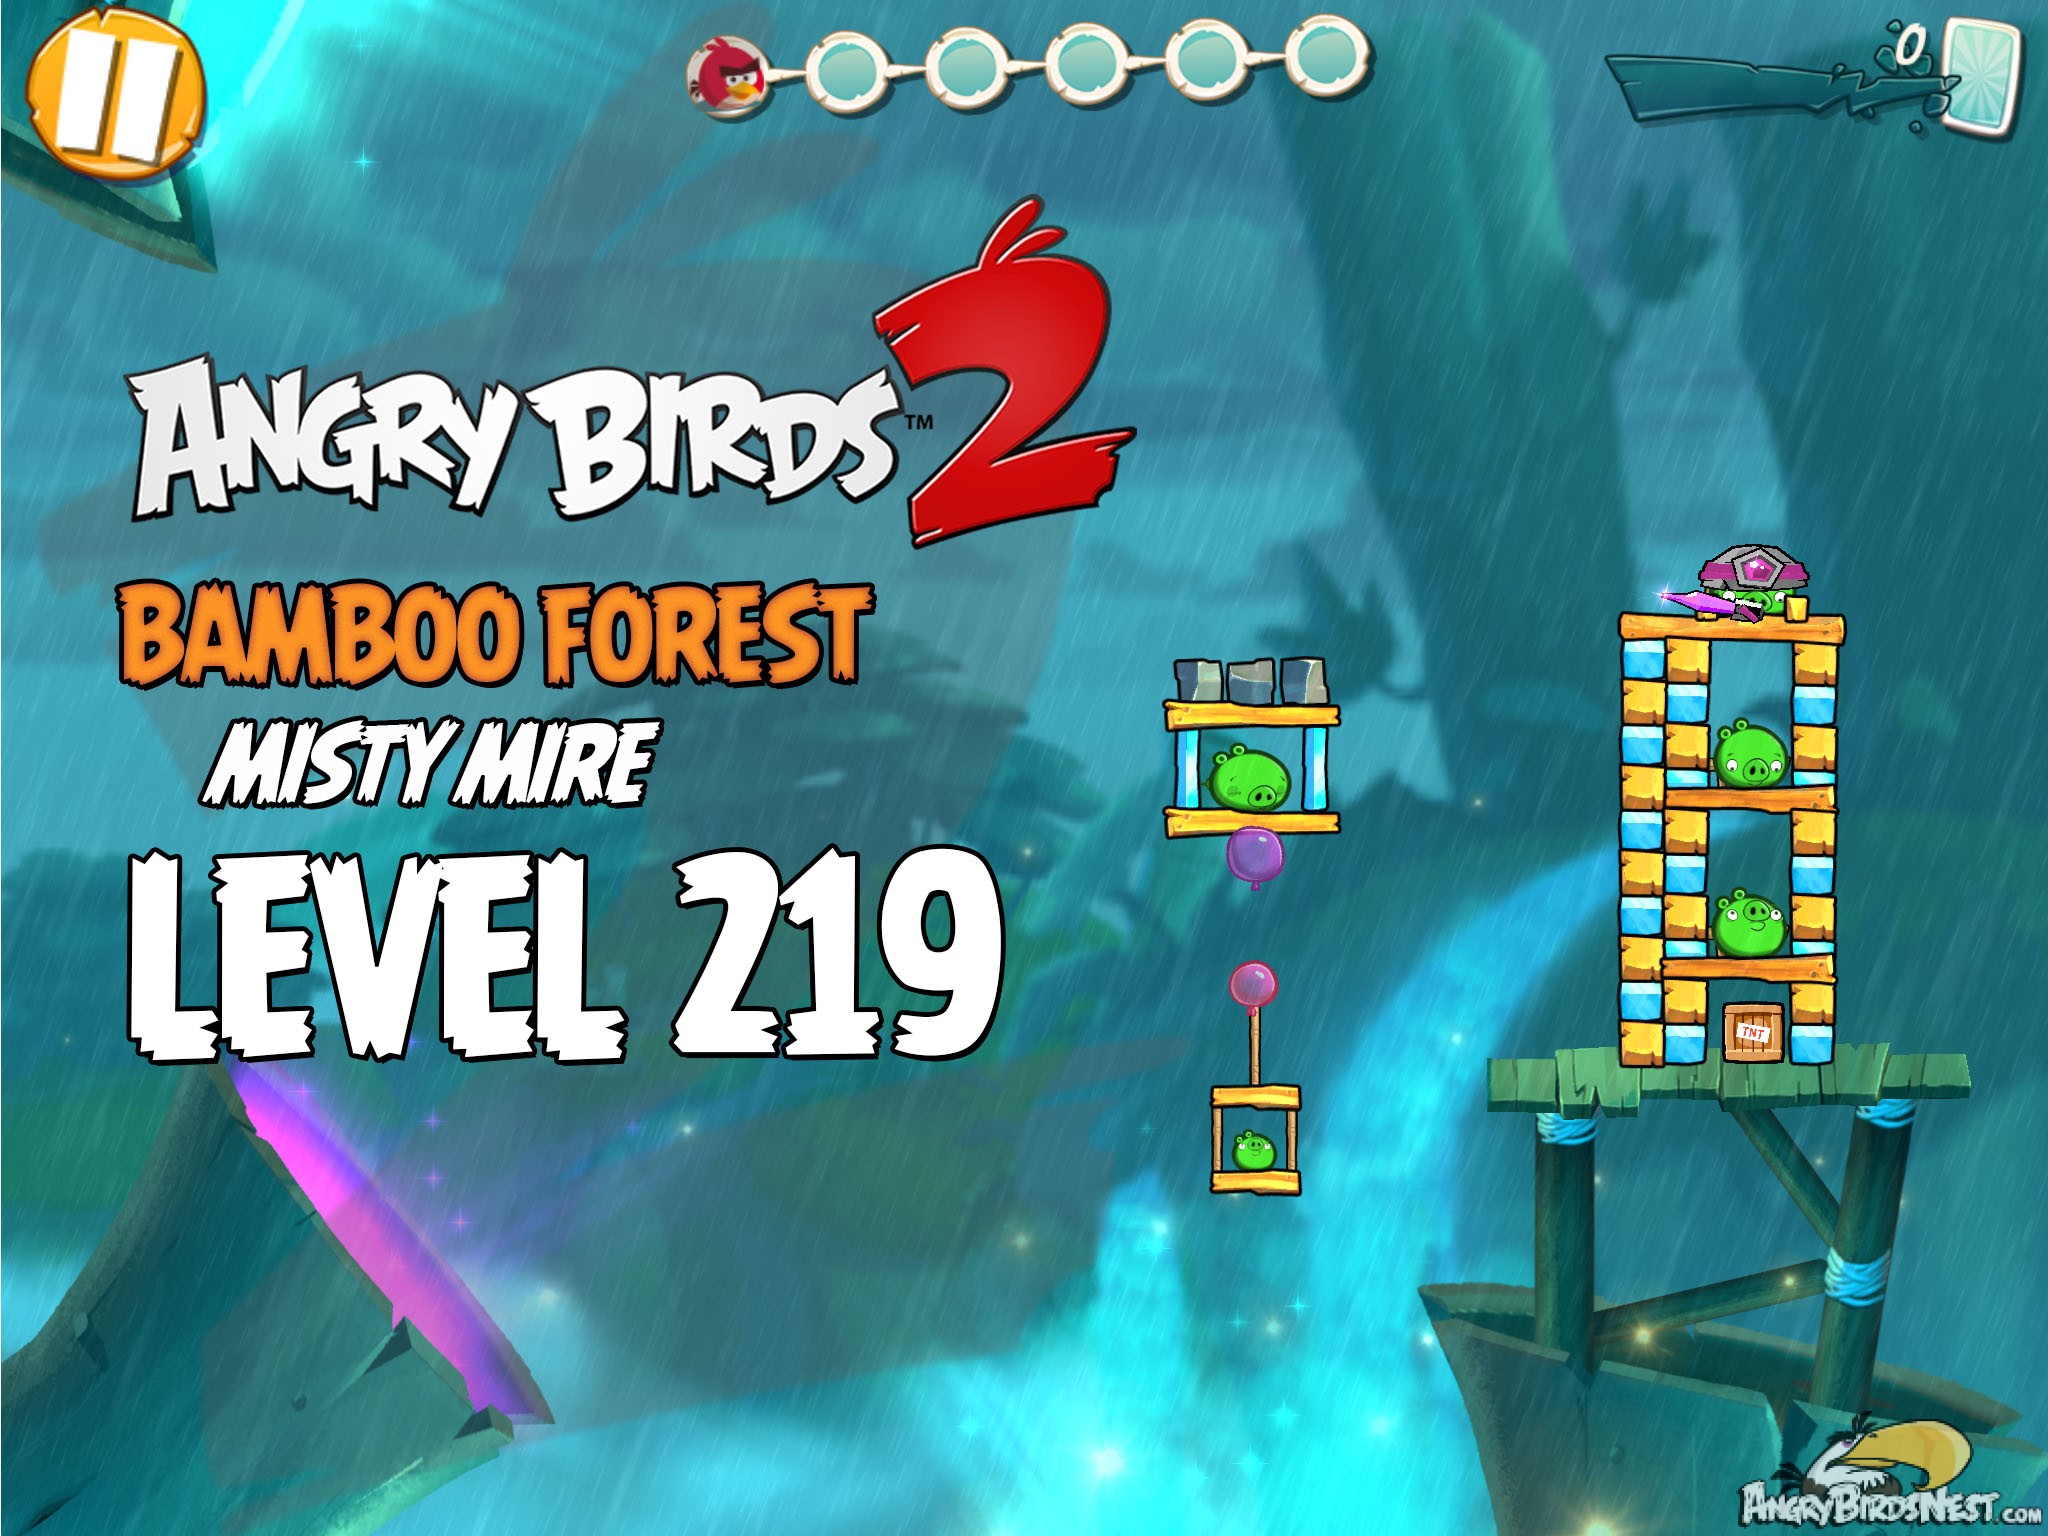 Angry Birds 2 Bamboo Forest Misty Mire Level 219